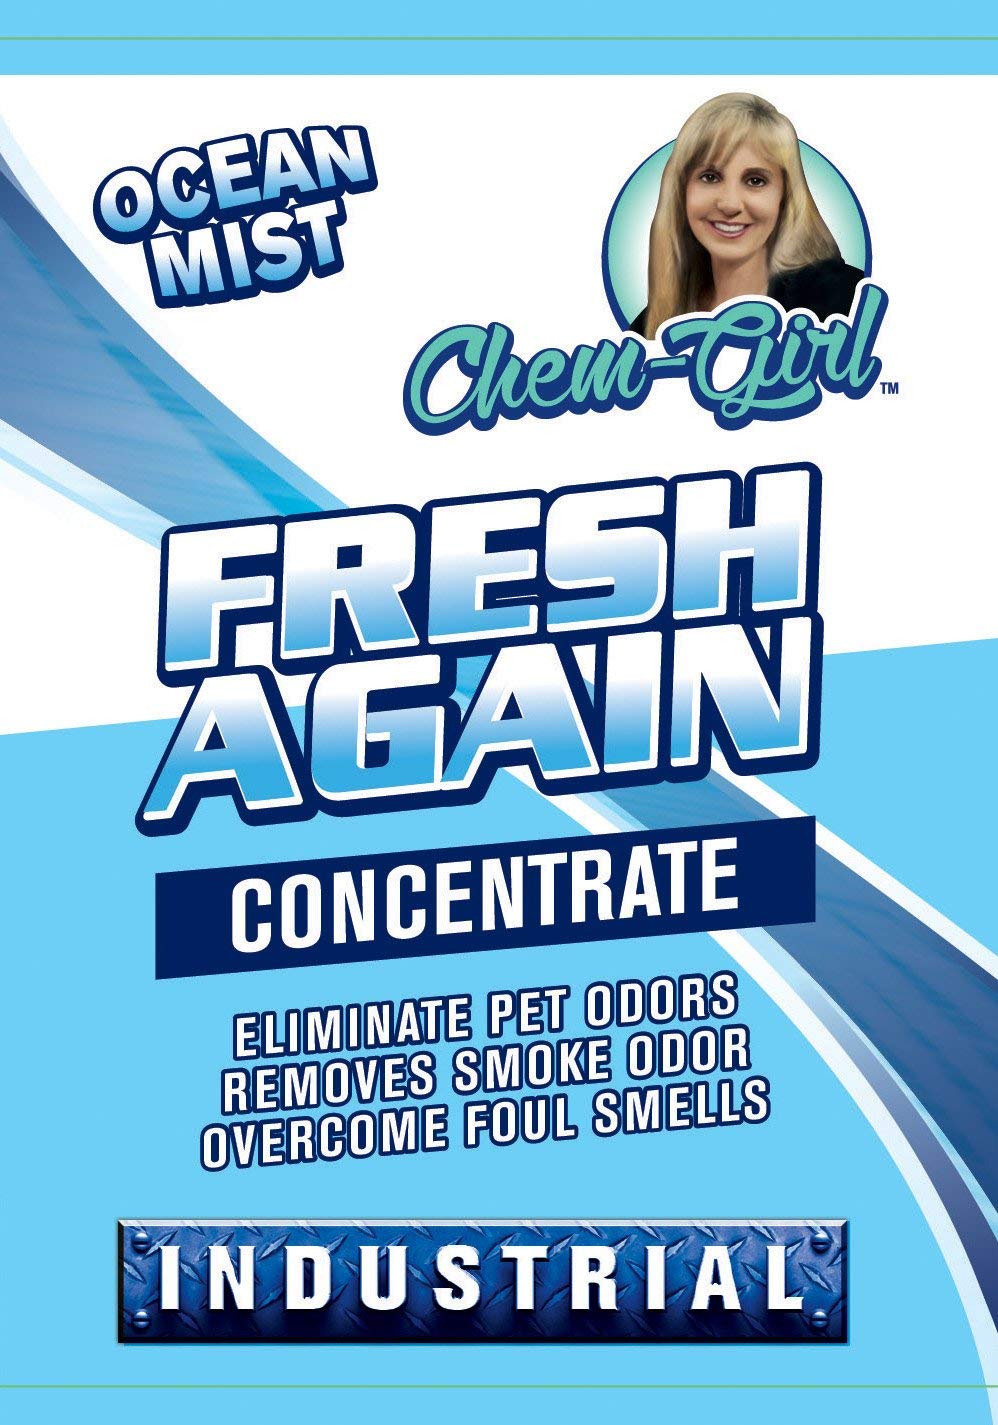 remove car odors, car odor removal, car smell, how to remove odor from car, how to get rid of smell in car, how to get musty smell out of car,  how to get rid of mold smell in car, how to get odor out of car carpet.